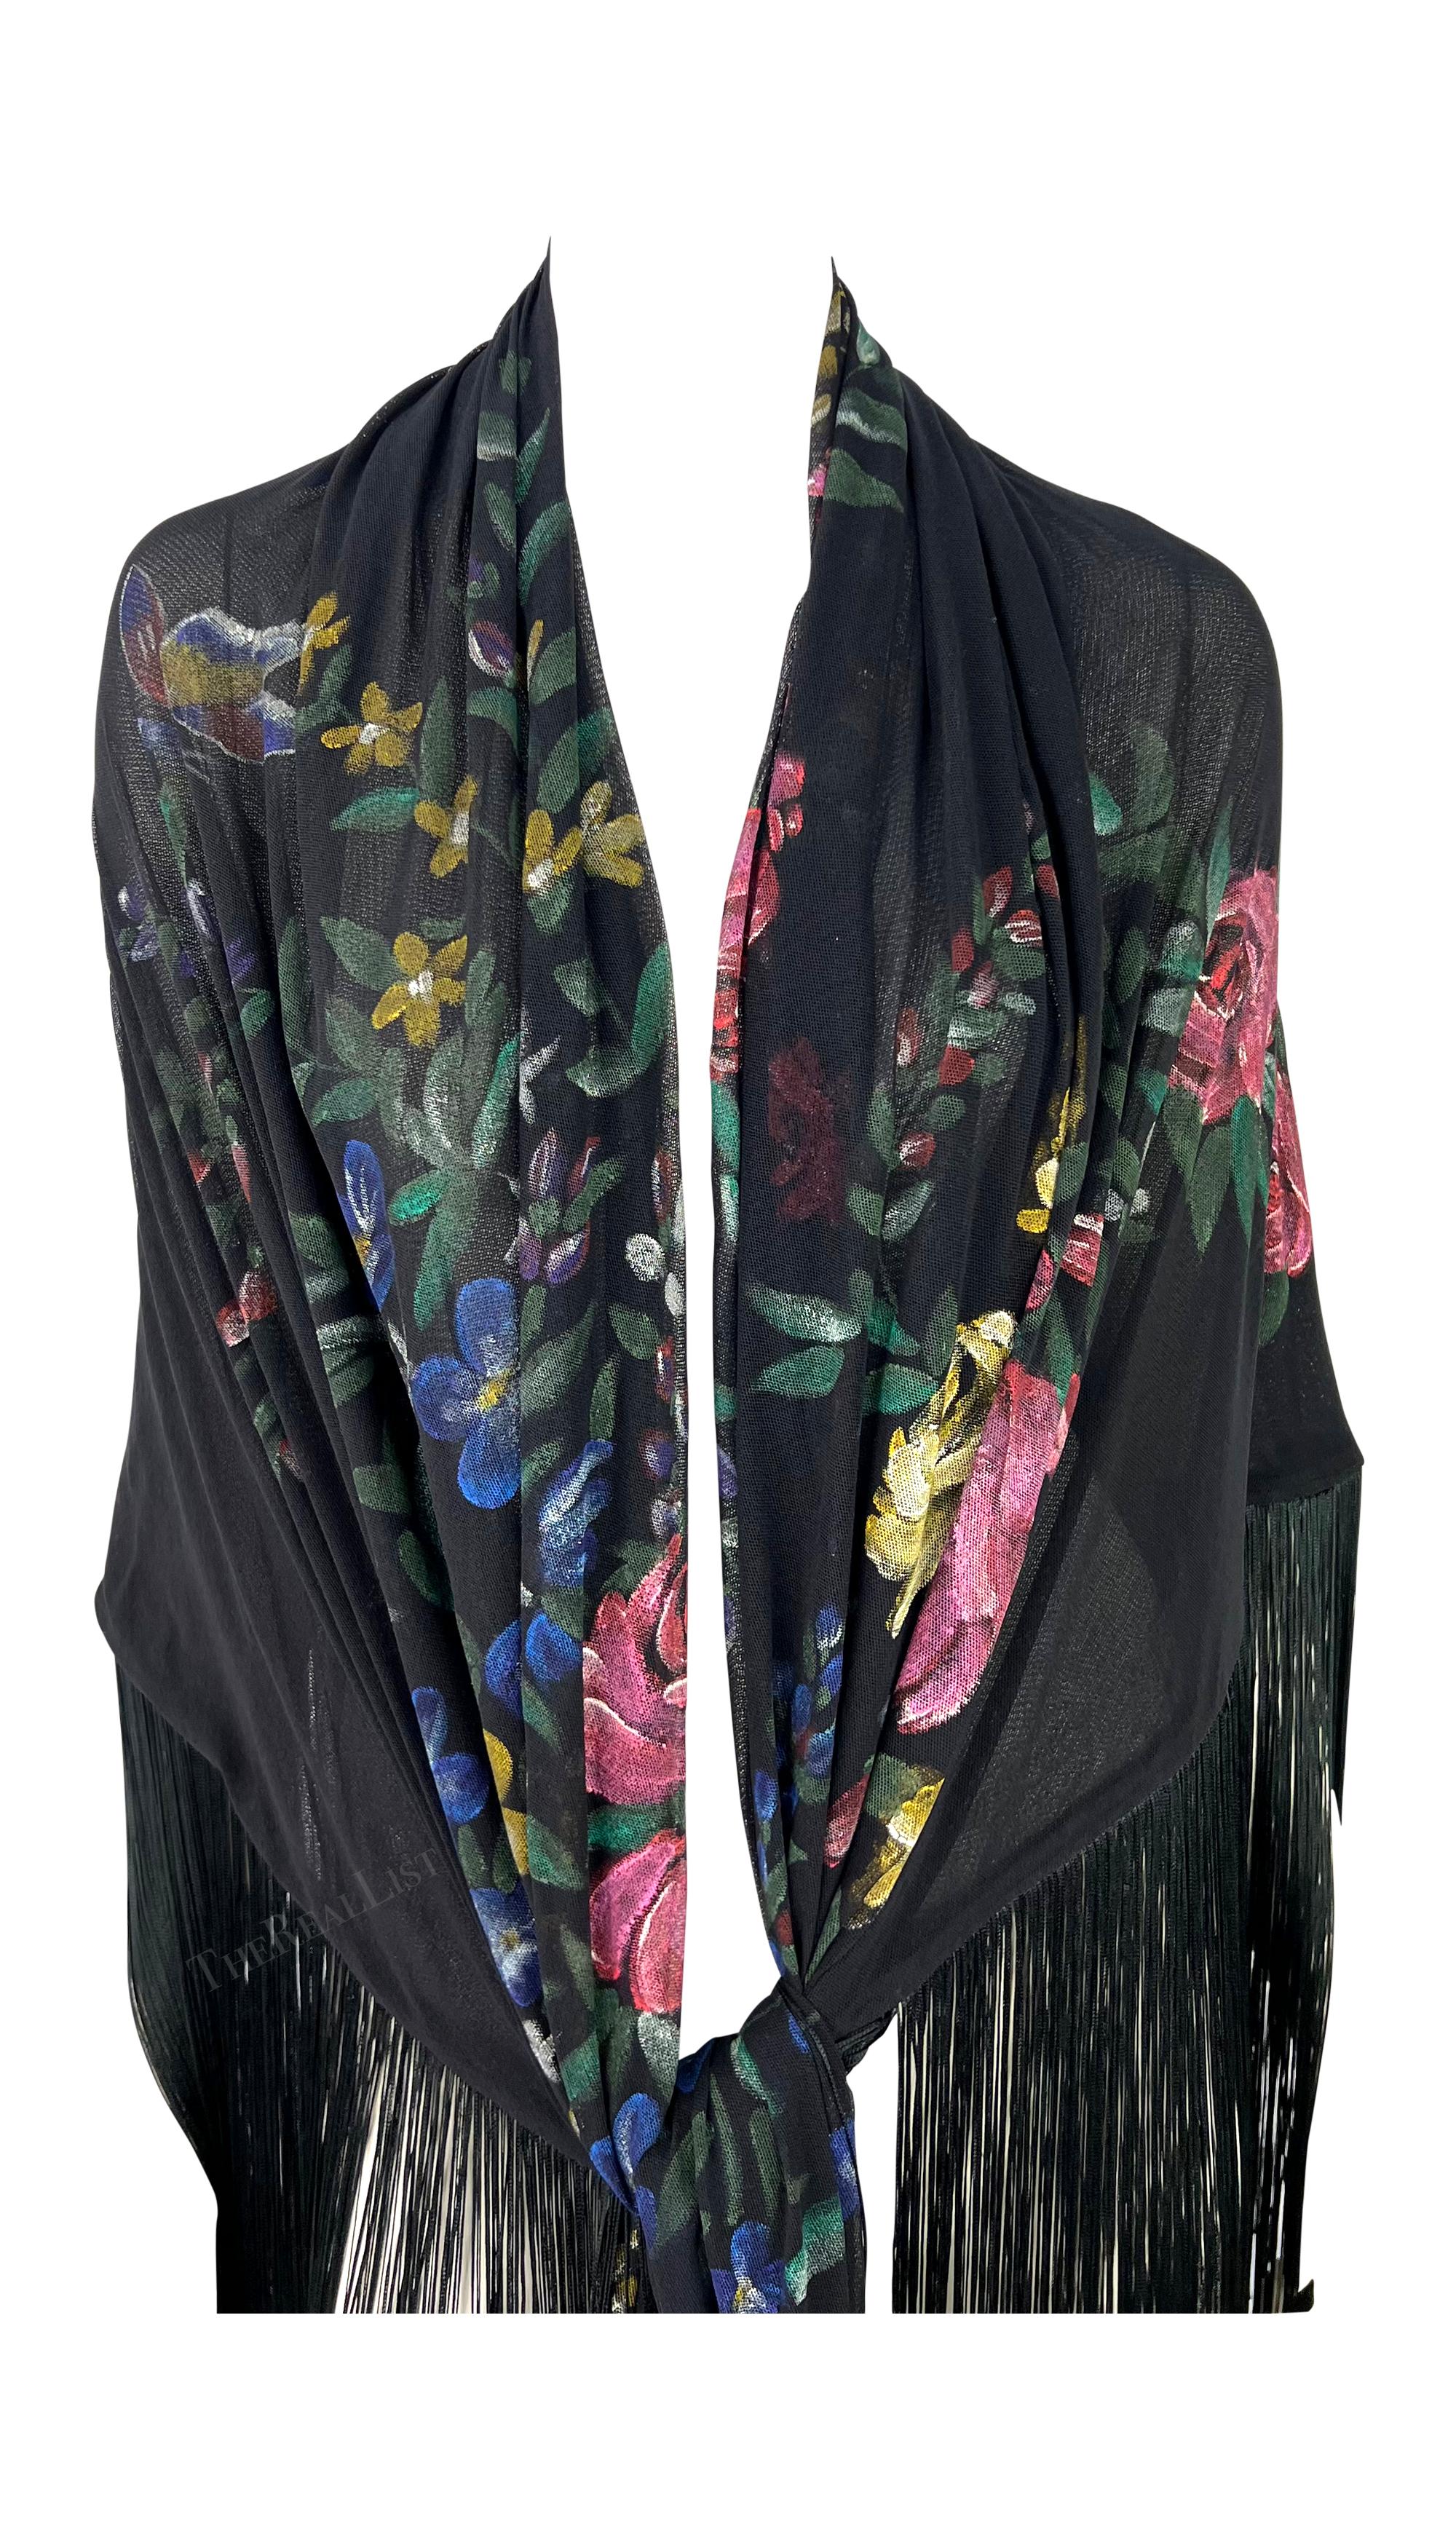 F/W 1998 Dolce & Gabbana Runway Floral Hand-Painted Sheer Mesh Fringe Shawl In Excellent Condition For Sale In West Hollywood, CA